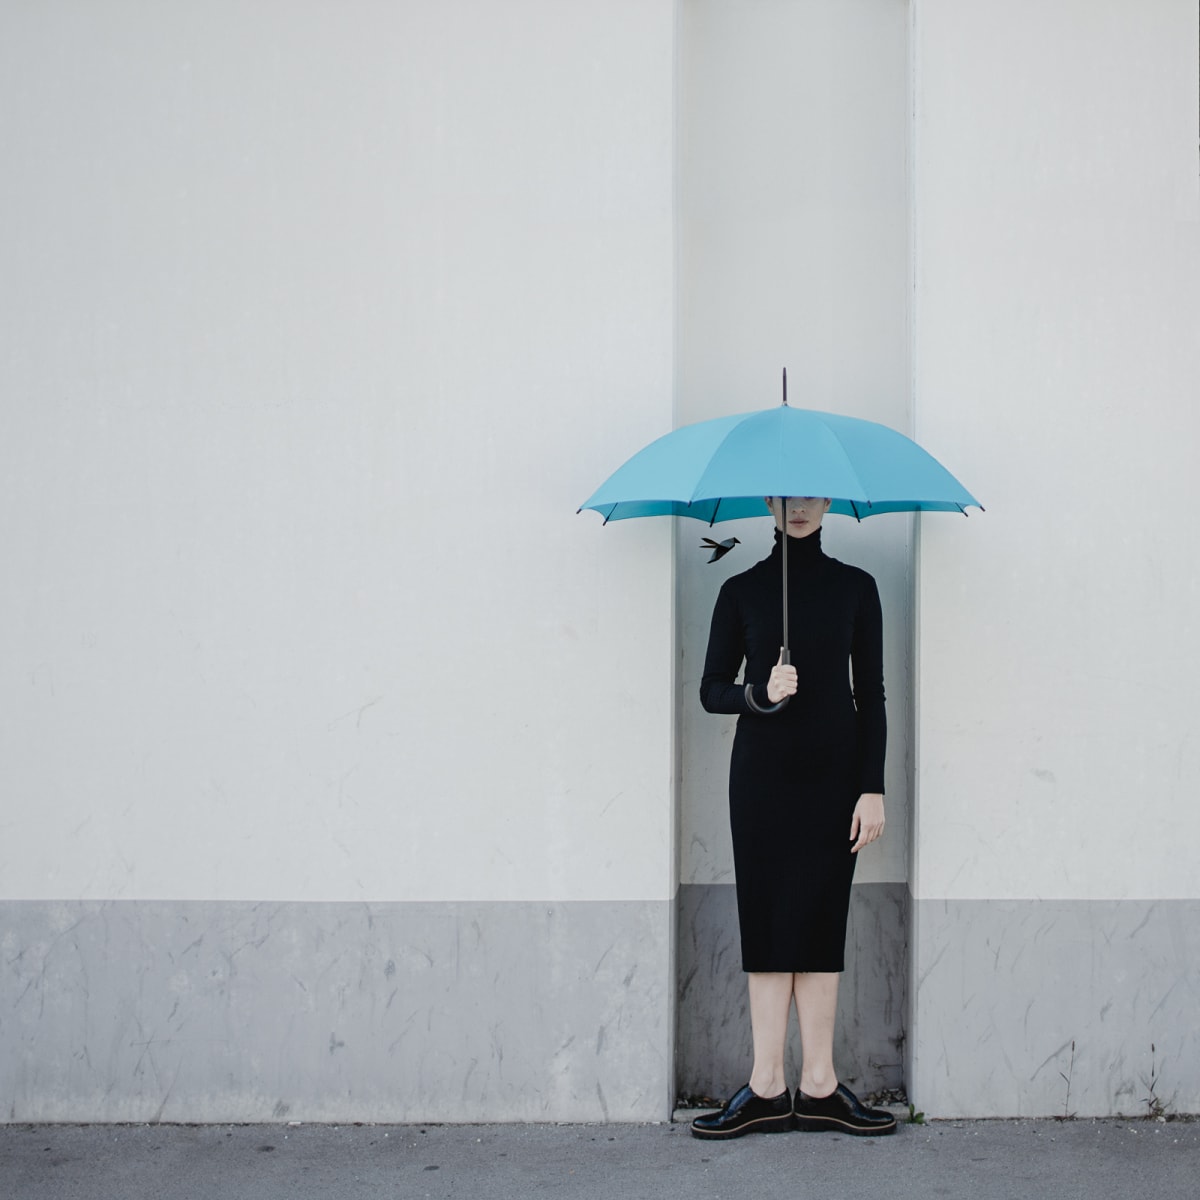 Not Alone In The Rain by Dasha Pears  Image: You're never alone.